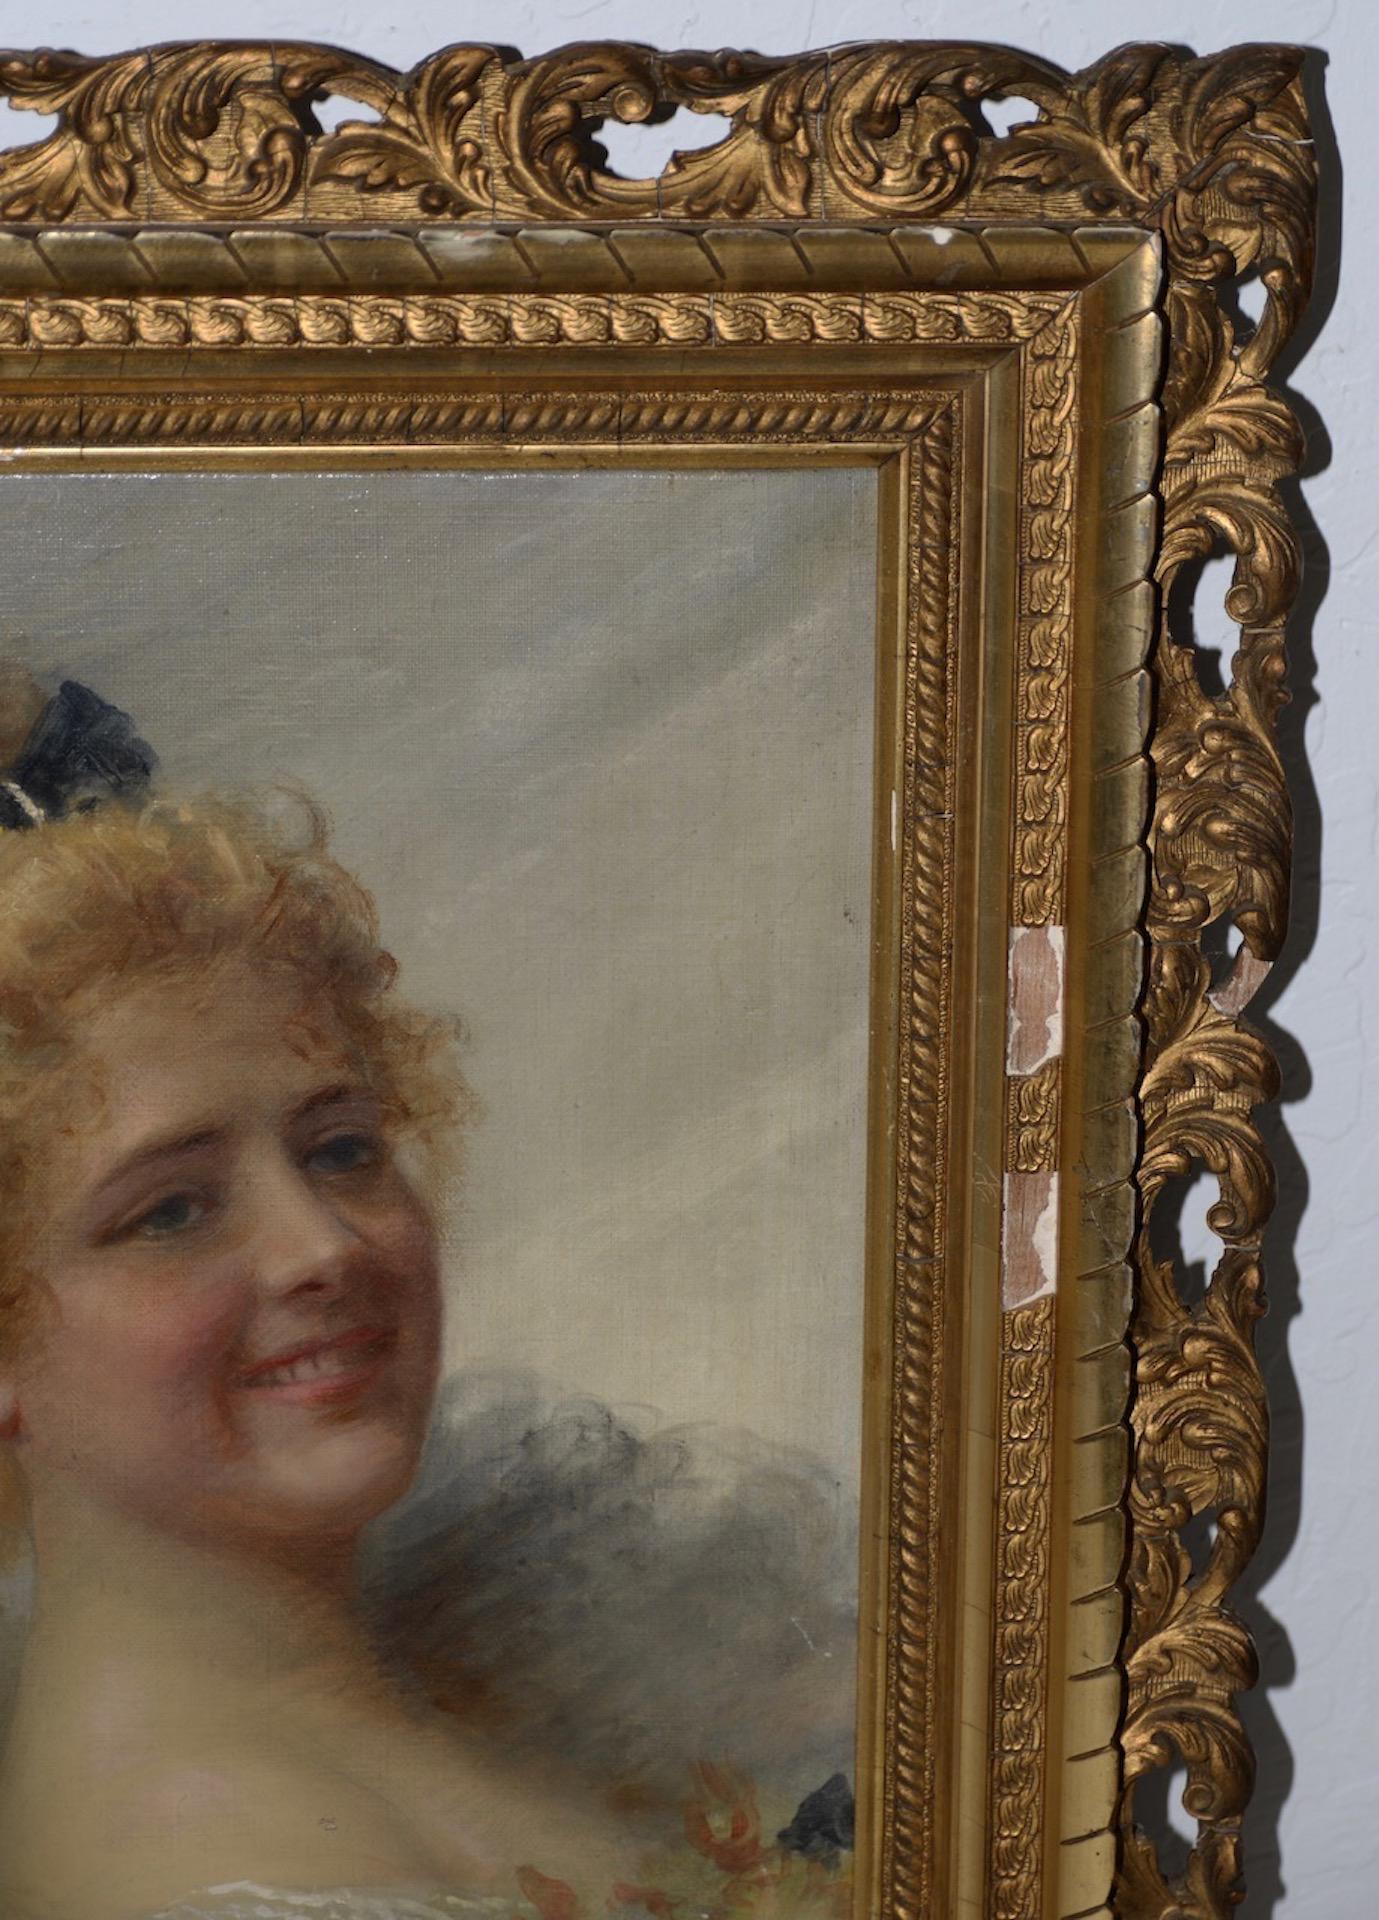 Adriano Goby 19th century oil portrait of a beautiful young lady, circa 1890s

Superb antique oil portrait, possibly, French. The painting is signed in the upper left corner (see pics).

The young woman looks like she could be a dancer holding a